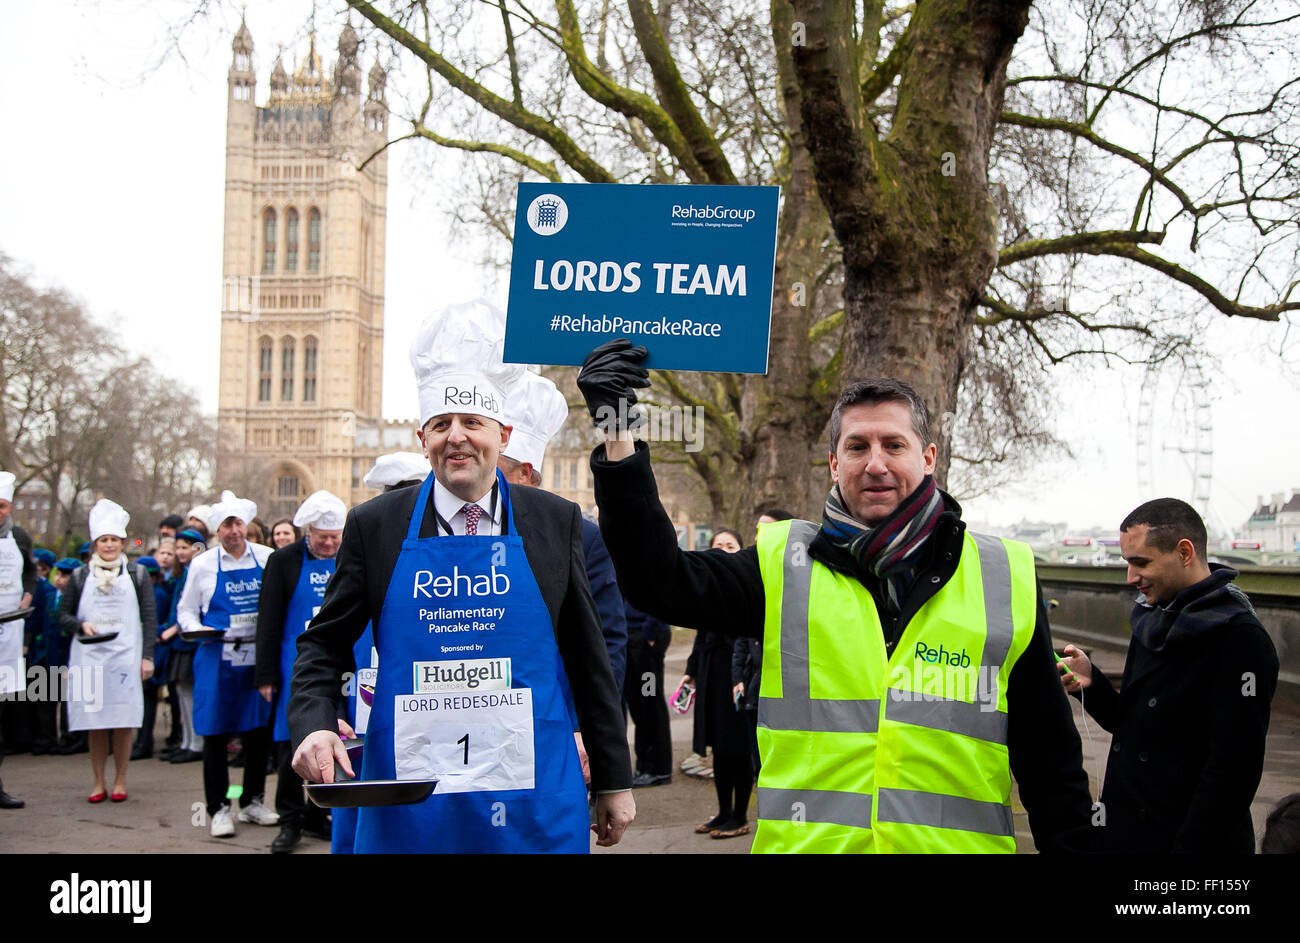 Westminster, London, United Kingdom. February 9th, 2016 - The captain of the Lords' team, Lord Redesdale leads his team at the annual Parliamentary pancake race in Victoria Gardens, Westminster.  Credit:  Dinendra Haria/Alamy Live News Stock Photo